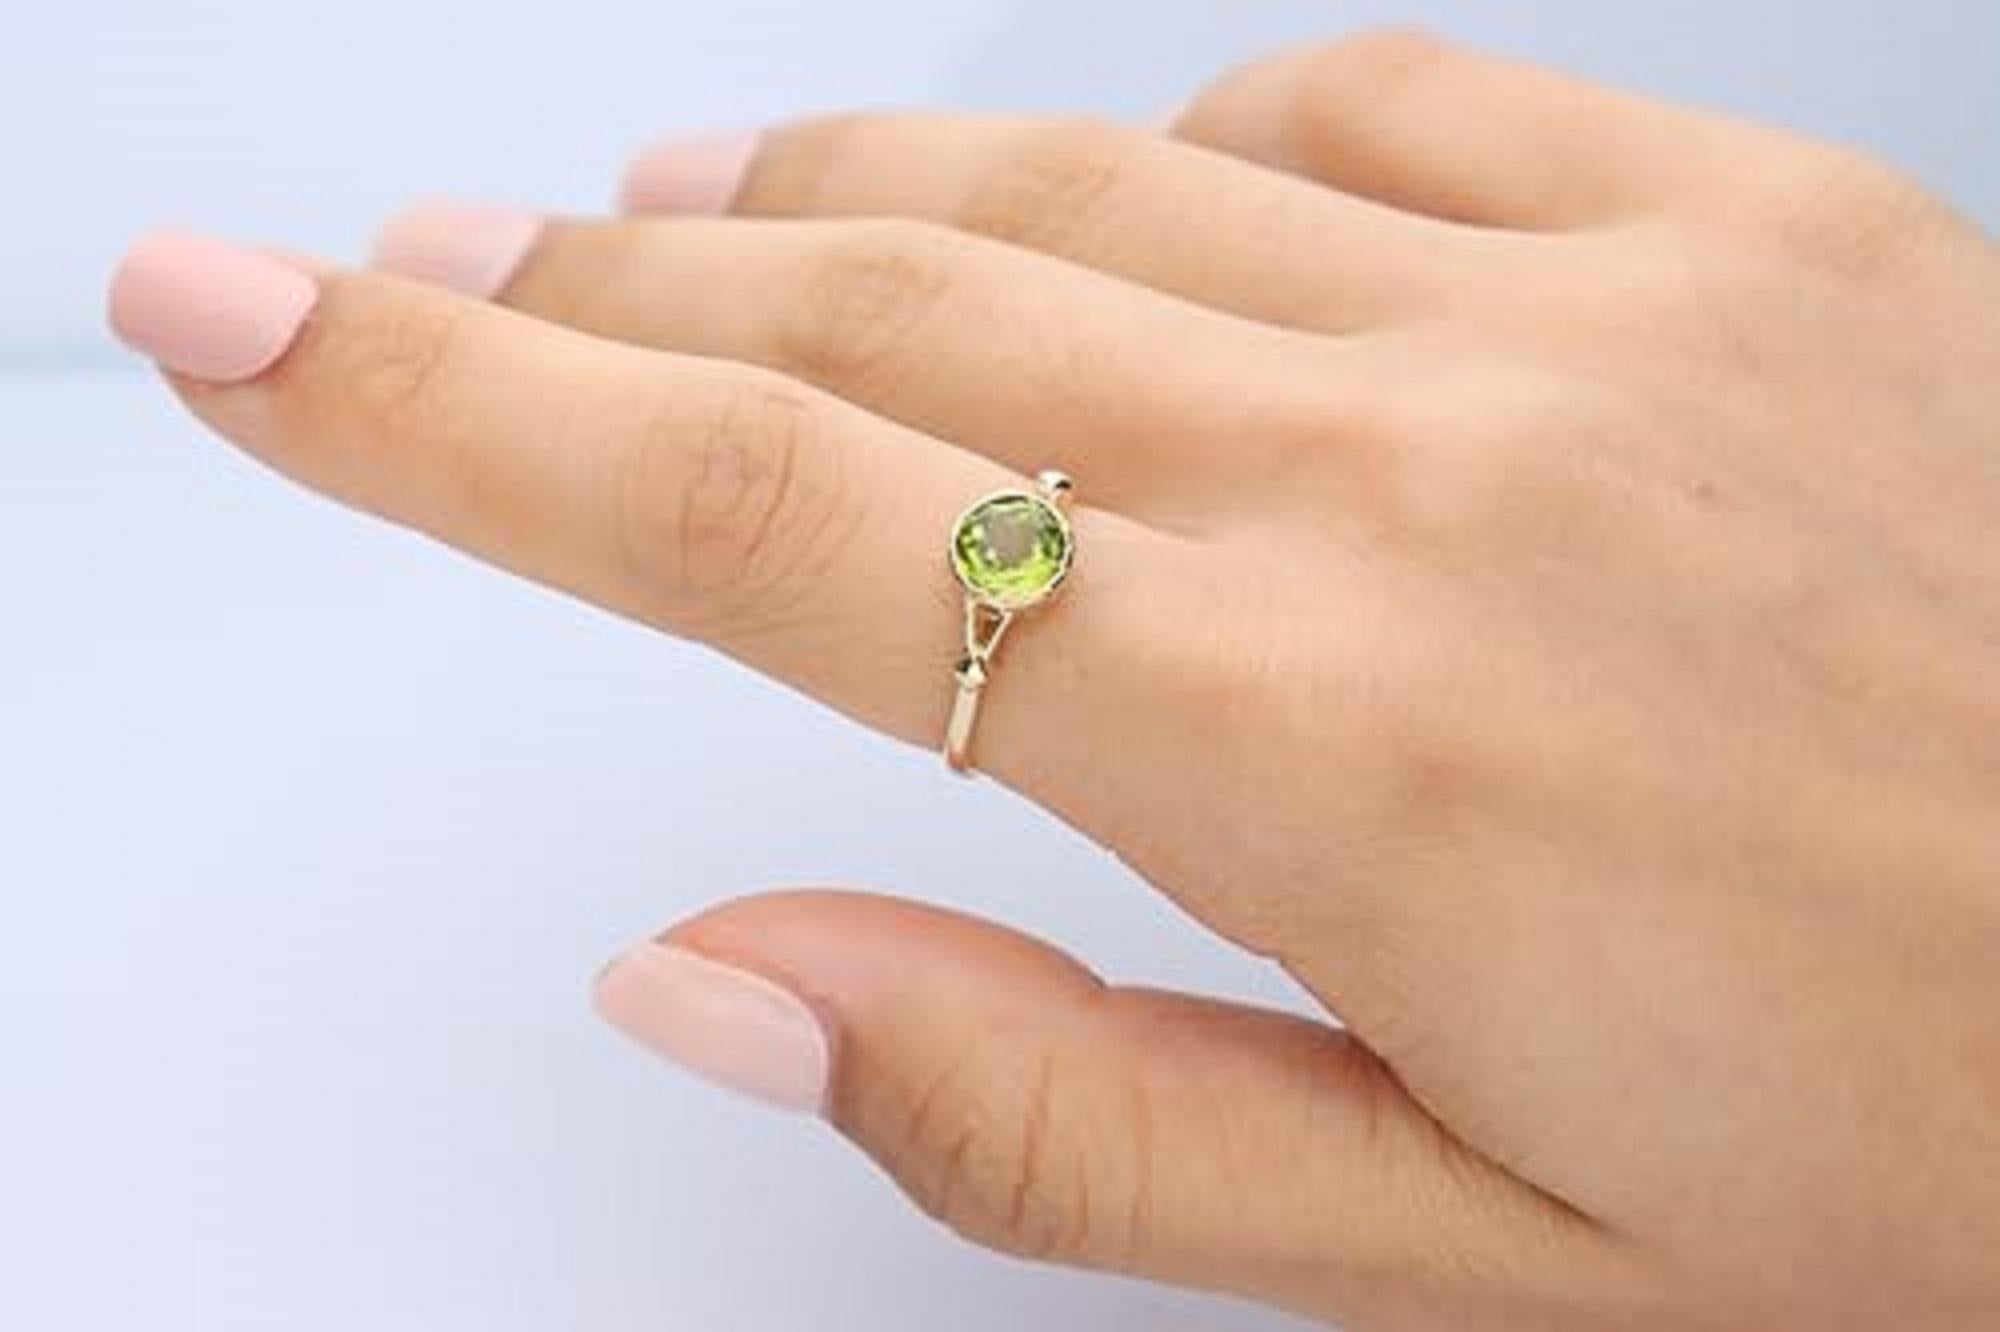 Decorate yourself in elegance with this Ring is crafted from 14-karat Yellow gold 7.0 mm Round-cut Peridot (1 pcs) 1.49 carat. This Ring is weight 1.92 grams. This delicate Ring is polished to a high finish shine.